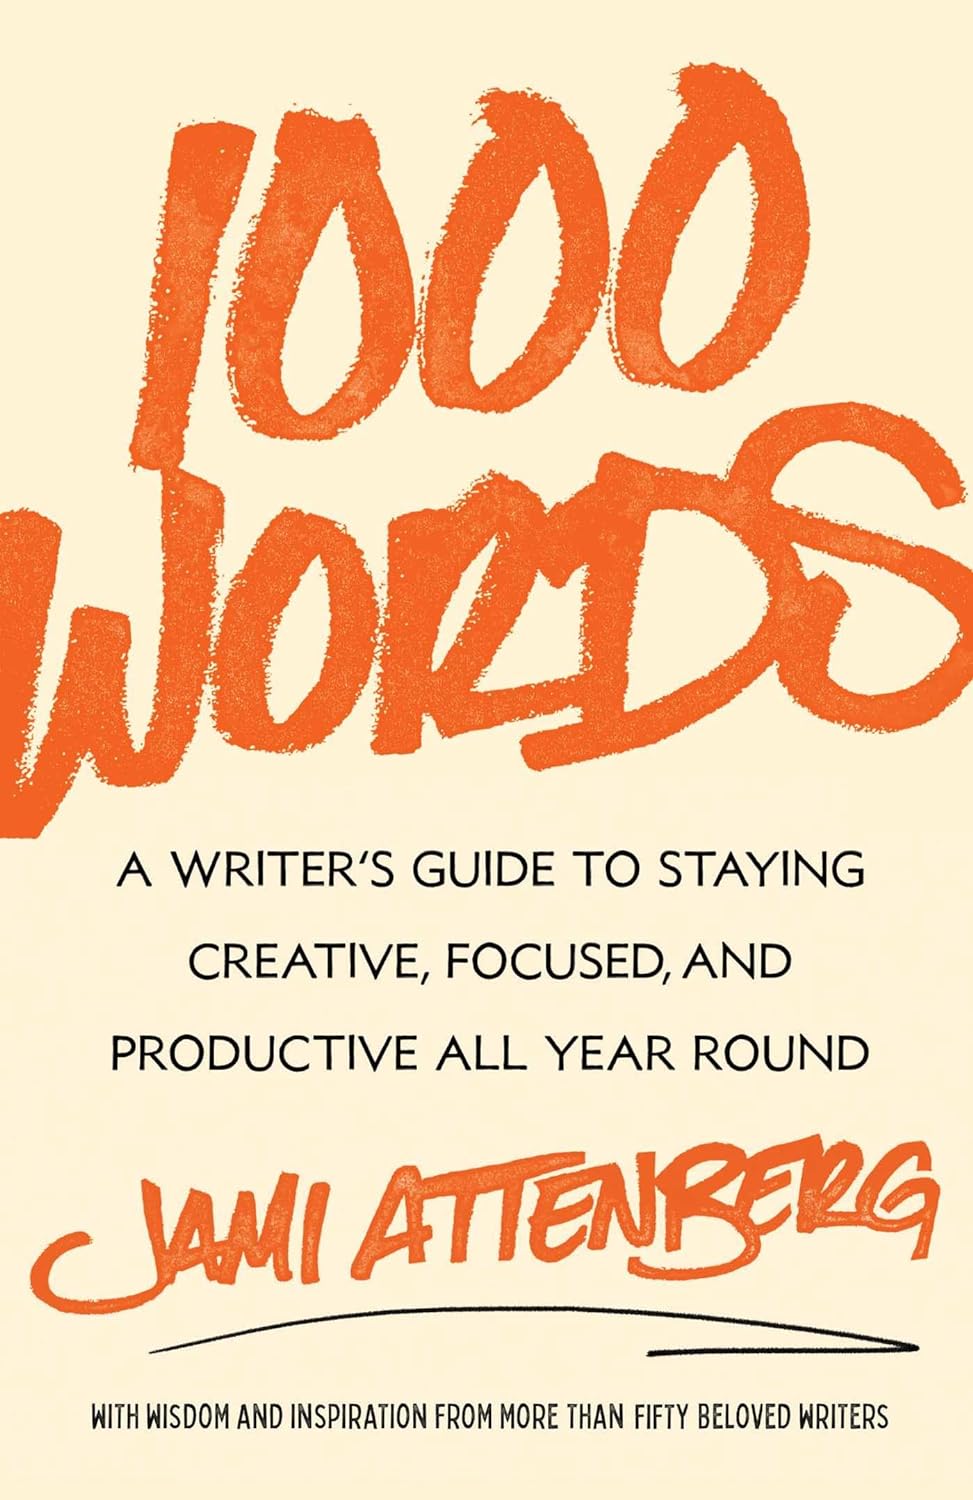 a graphic of the cover of 1000 Words: A Writer's Guide to Staying Creative, Focused, and Productive All Year Round by Jami Attenberg